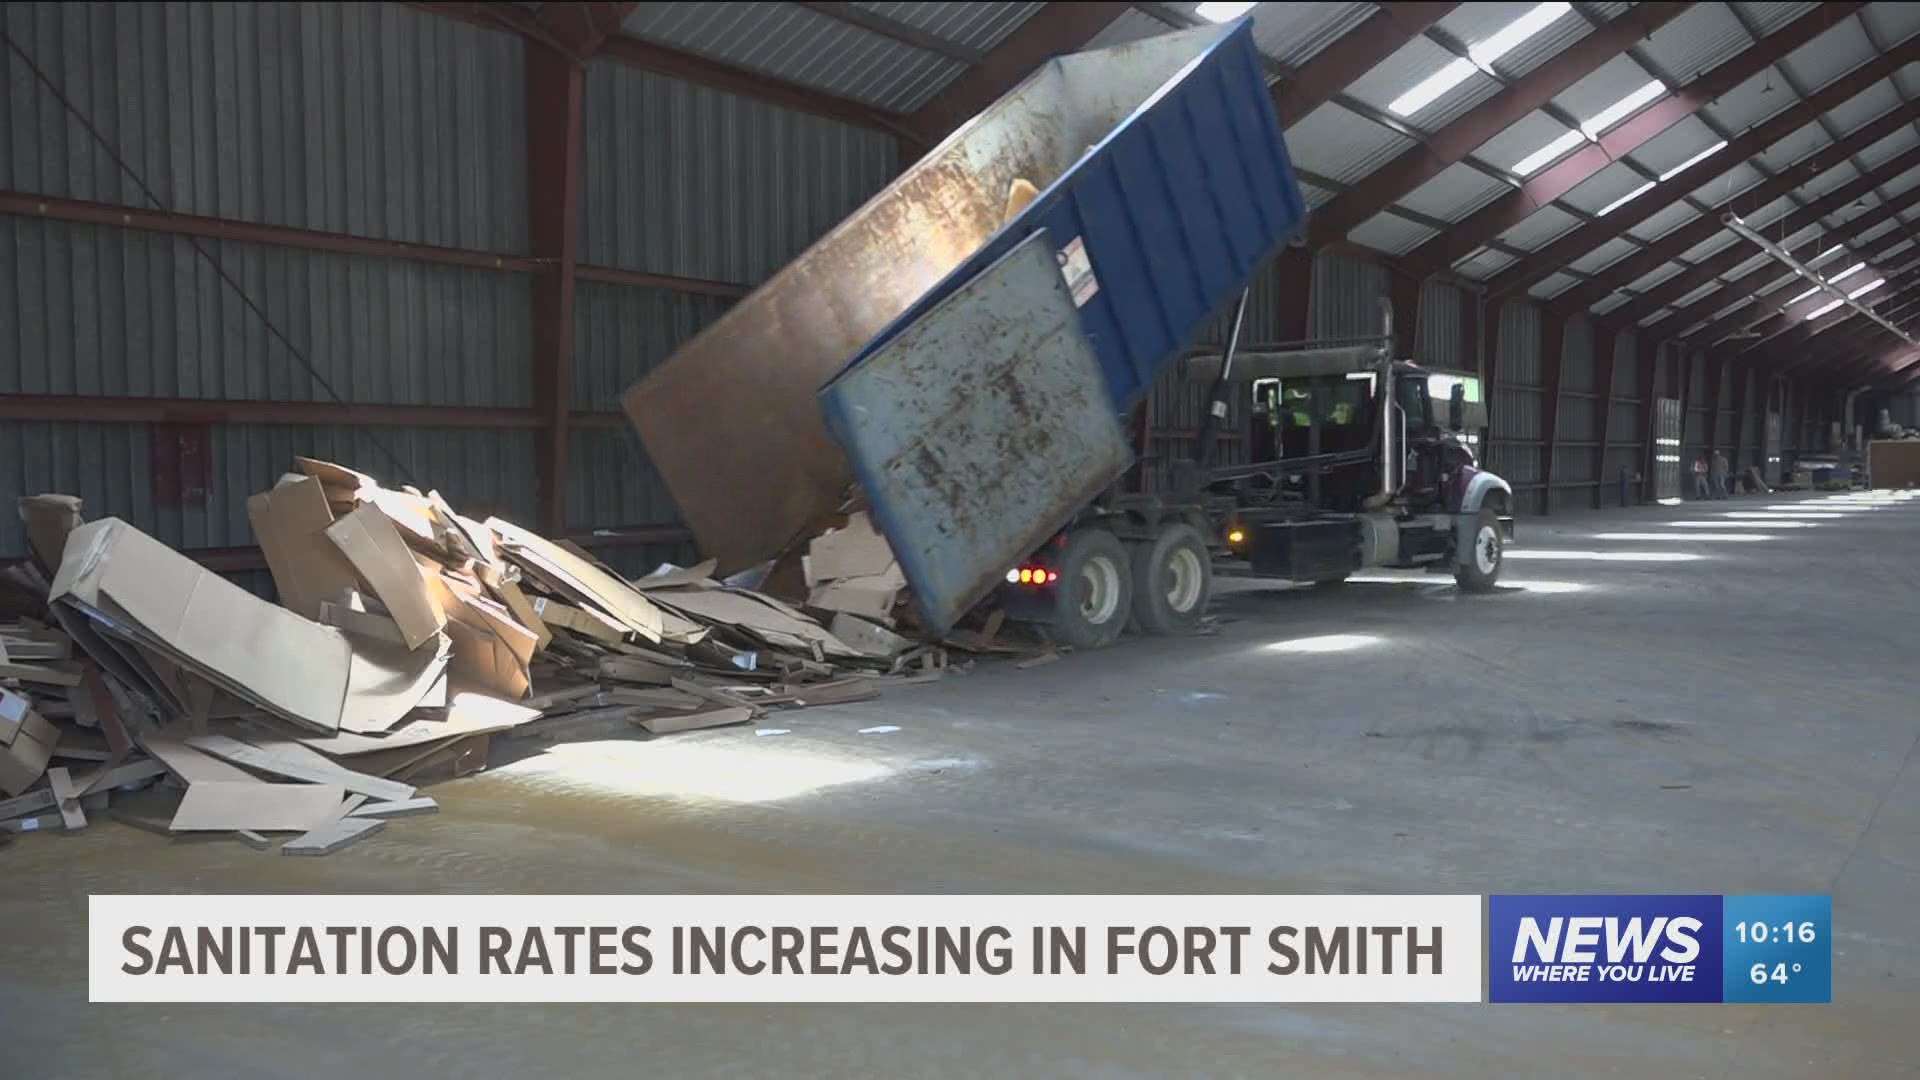 Sanitation rates increasing in Fort Smith, recycling pick up schedule changed.